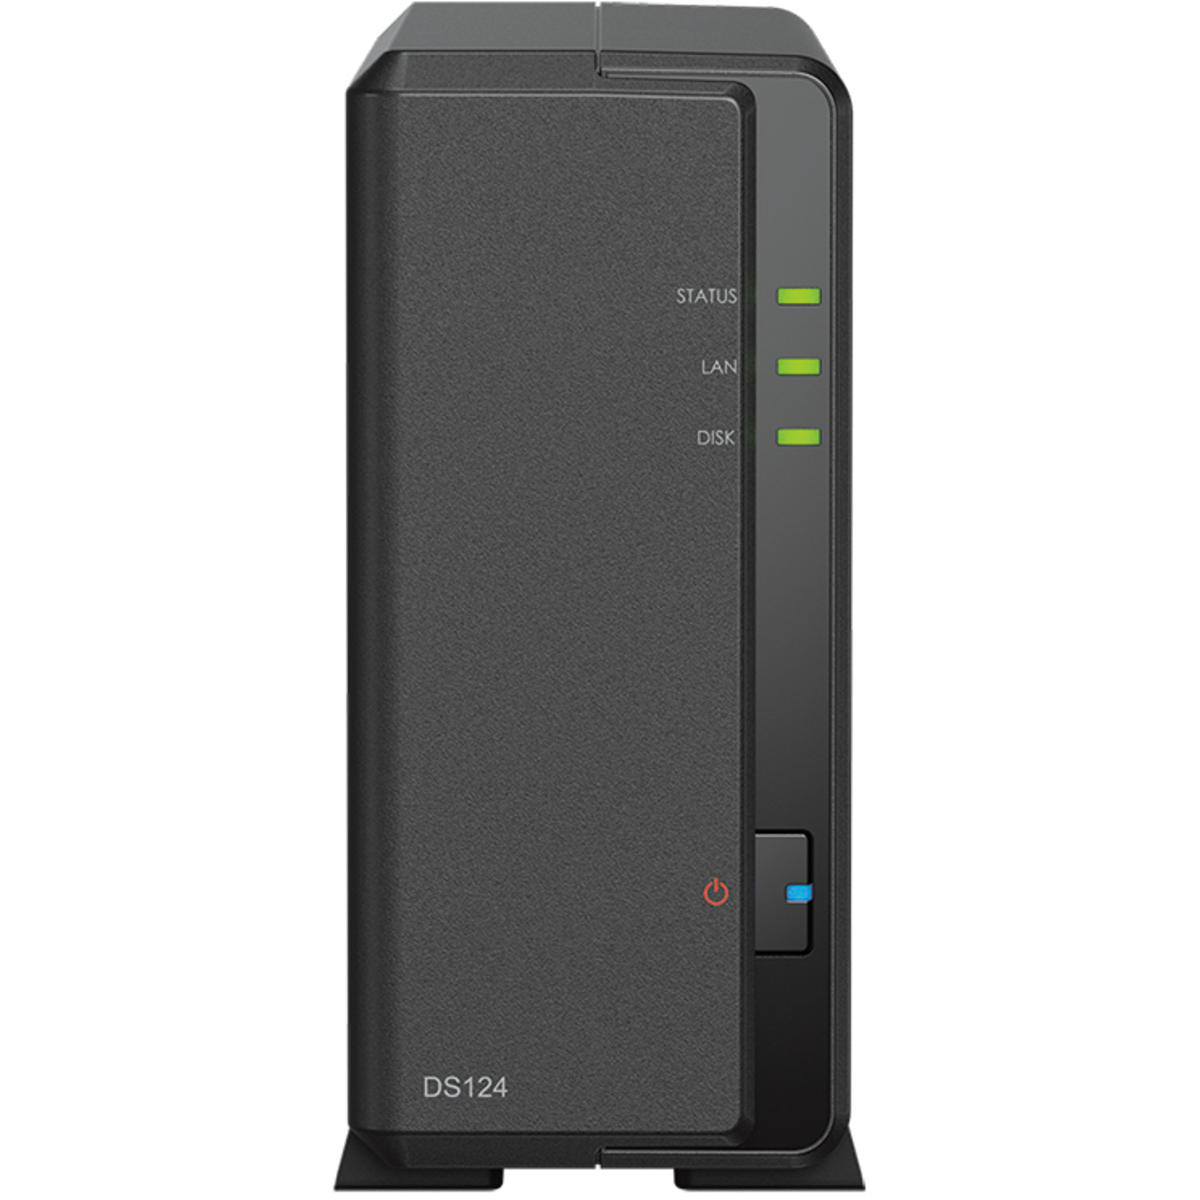 buy Synology DiskStation DS124 22tb Desktop NAS - Network Attached Storage Device 1x22000gb Seagate IronWolf Pro ST22000NT001 3.5 7200rpm SATA 6Gb/s HDD NAS Class Drives Installed - Burn-In Tested - nas headquarters buy network attached storage server device das new raid-5 free shipping simply usa DiskStation DS124